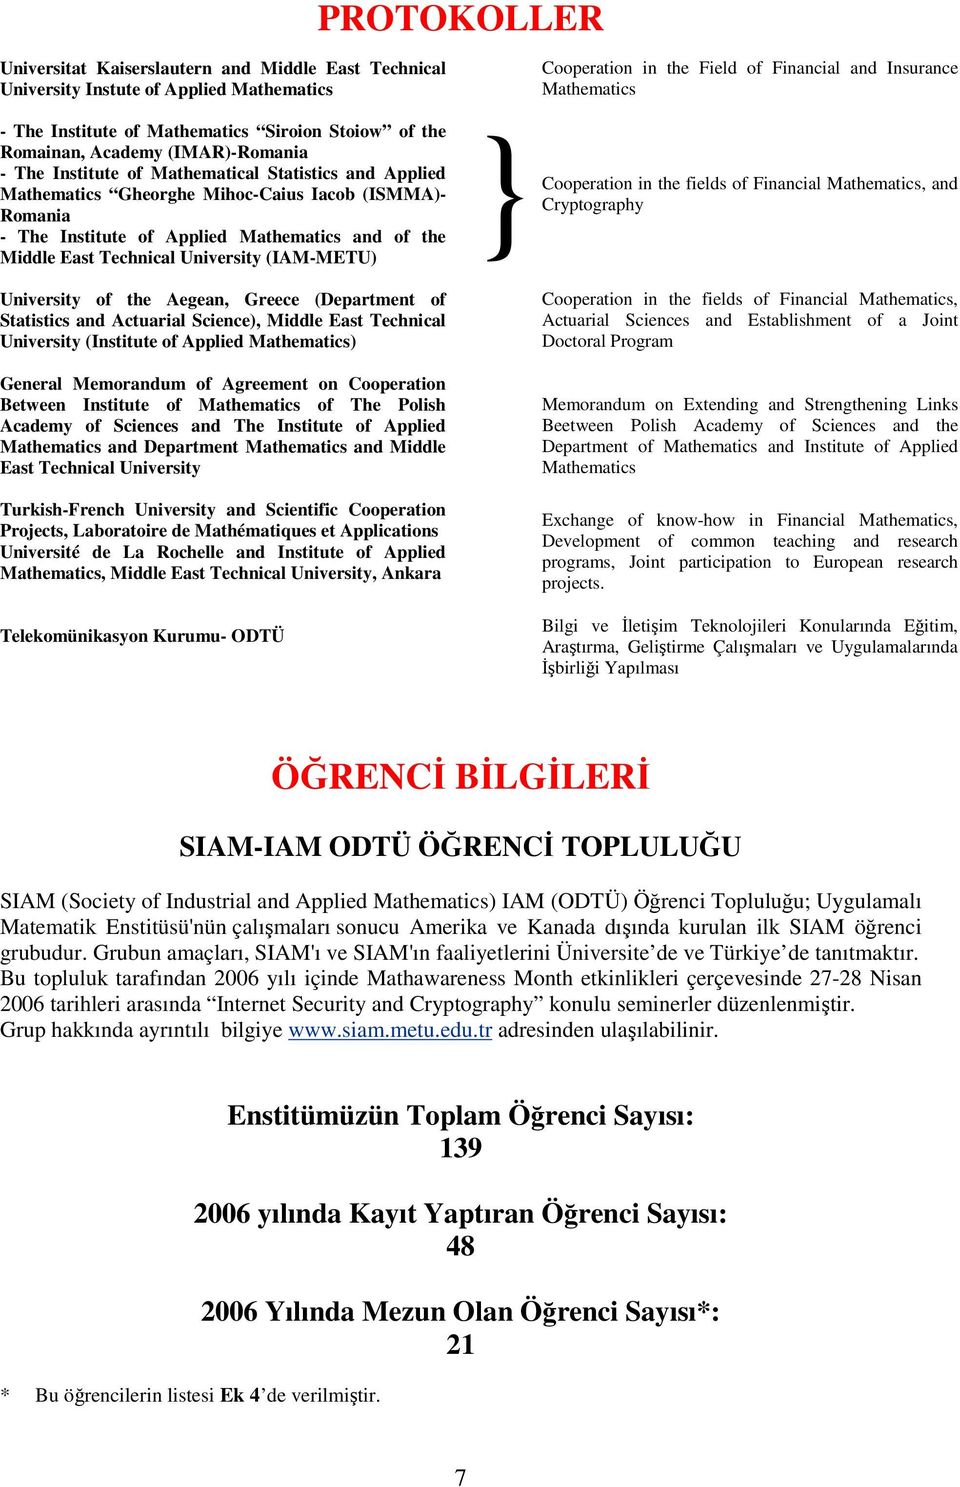 University of the Aegean, Greece (Department of Statistics and Actuarial Science), Middle East Technical University (Institute of Applied Mathematics) General Memorandum of Agreement on Cooperation